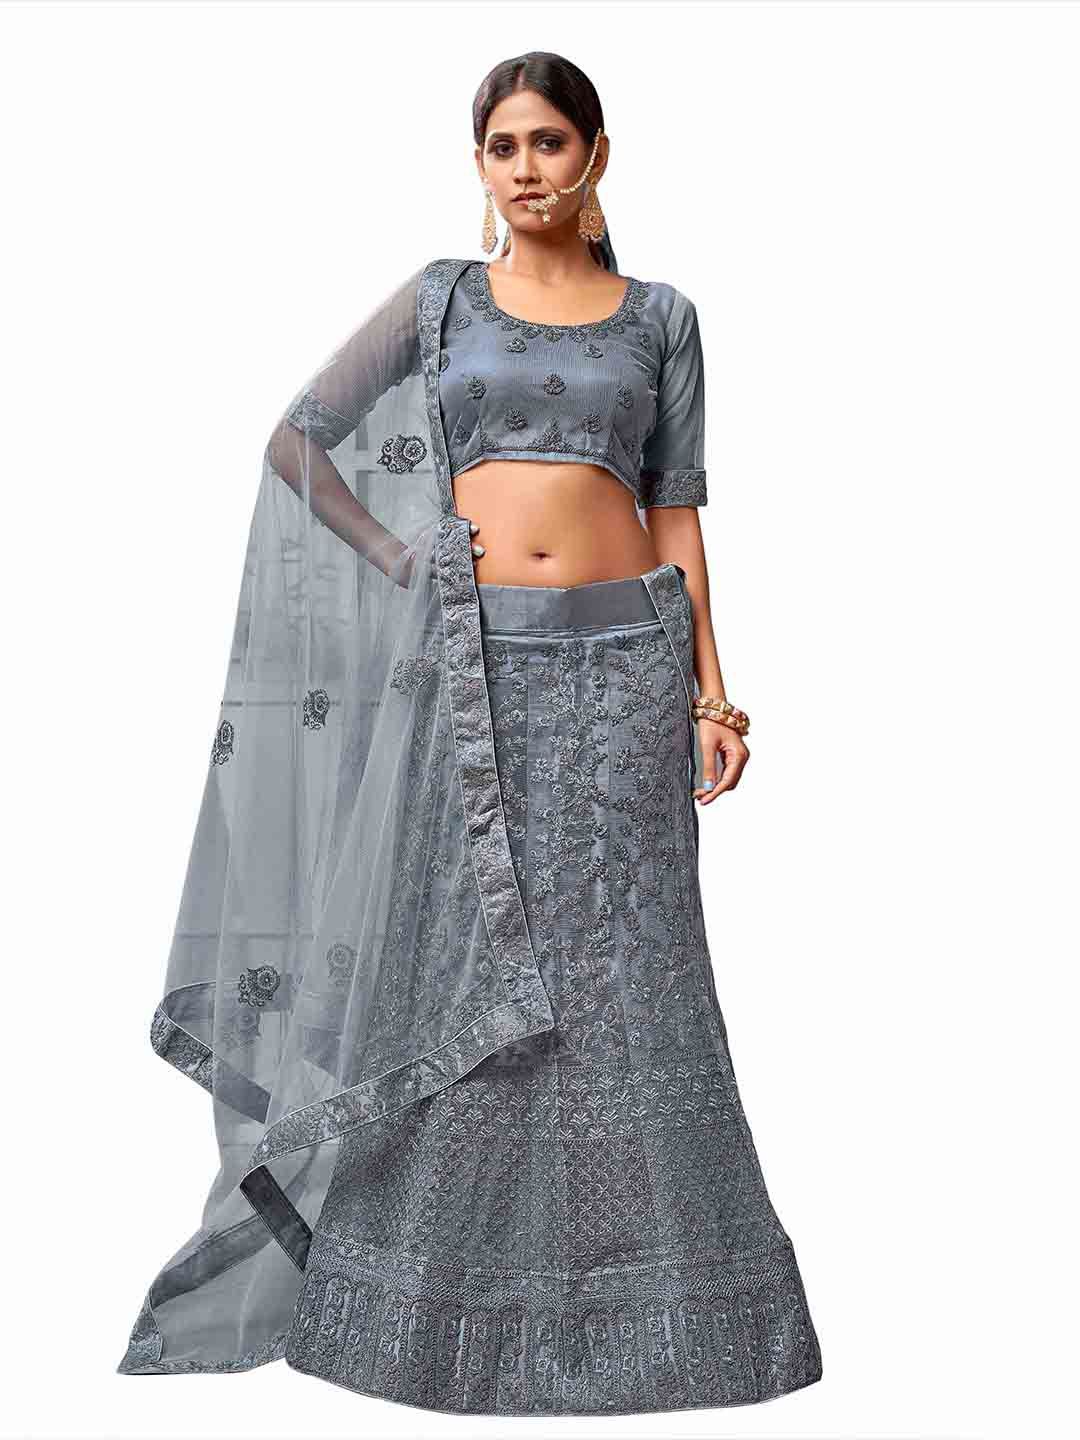 MANVAA Embroidered Thread Work Semi-Stitched Lehenga & Unstitched Blouse With Dupatta Price in India